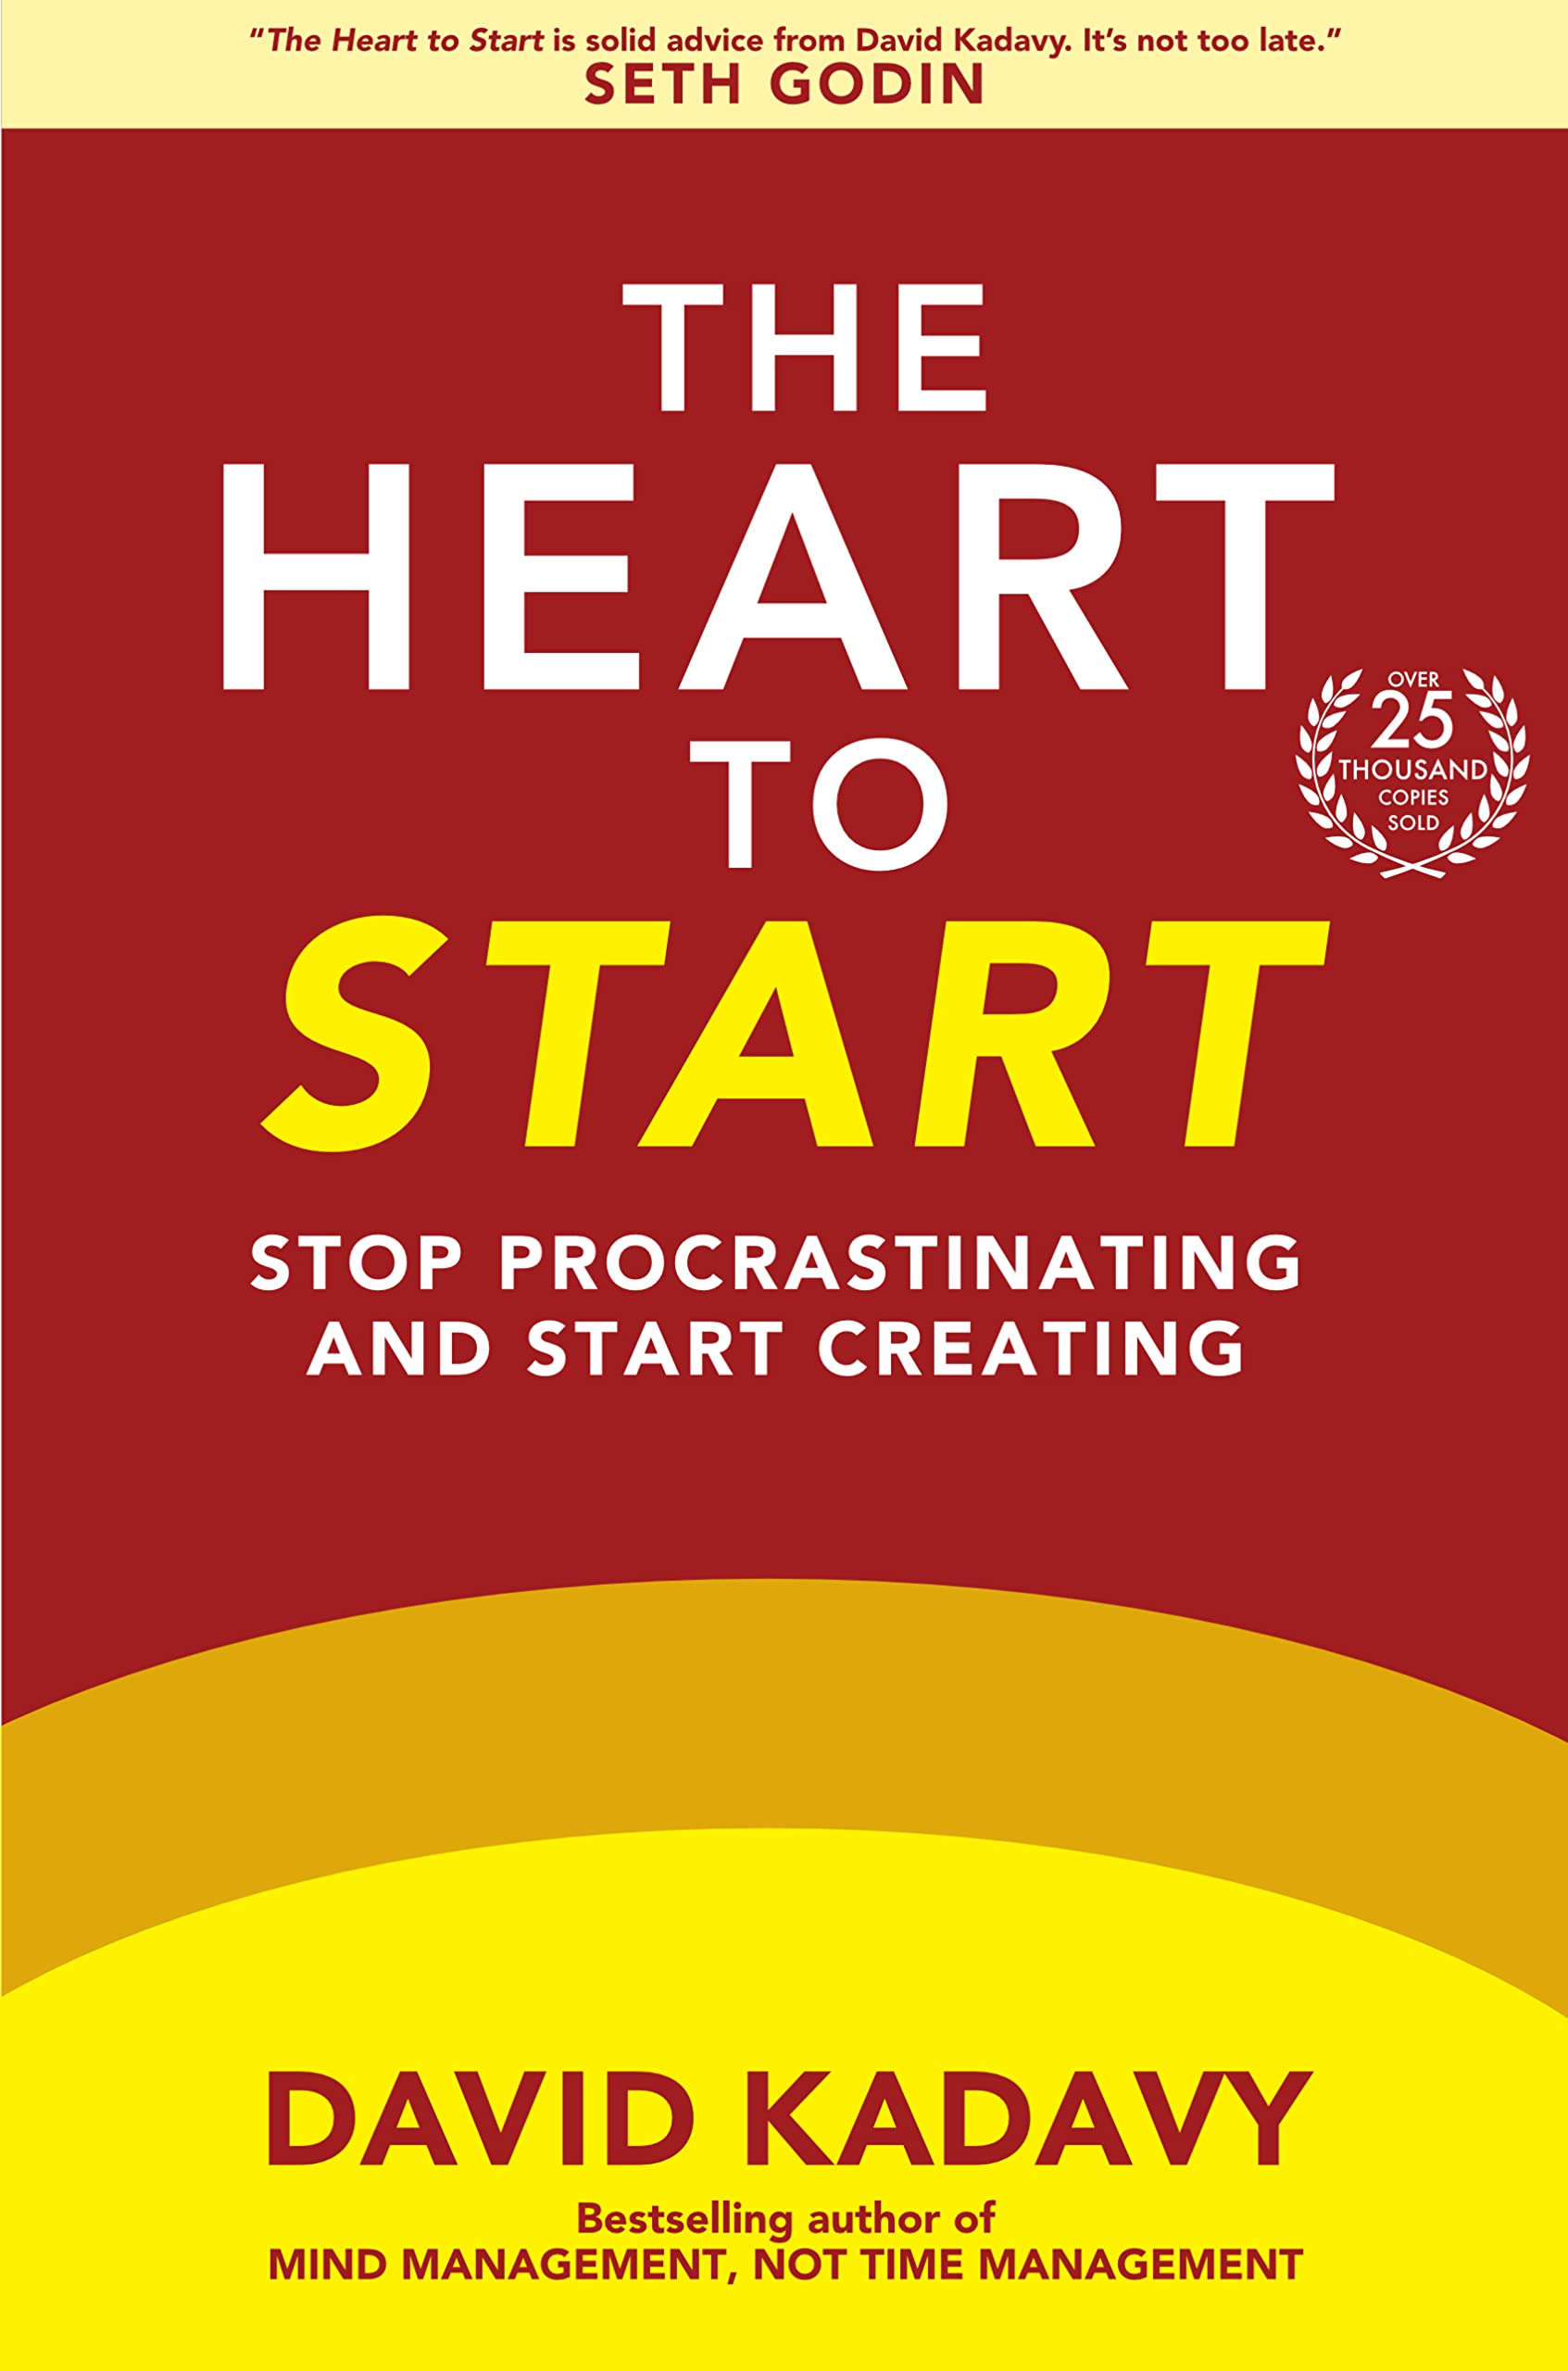 The Heart to Start: Stop Procrastinating & Start Creating (Getting Art Done Book 1)